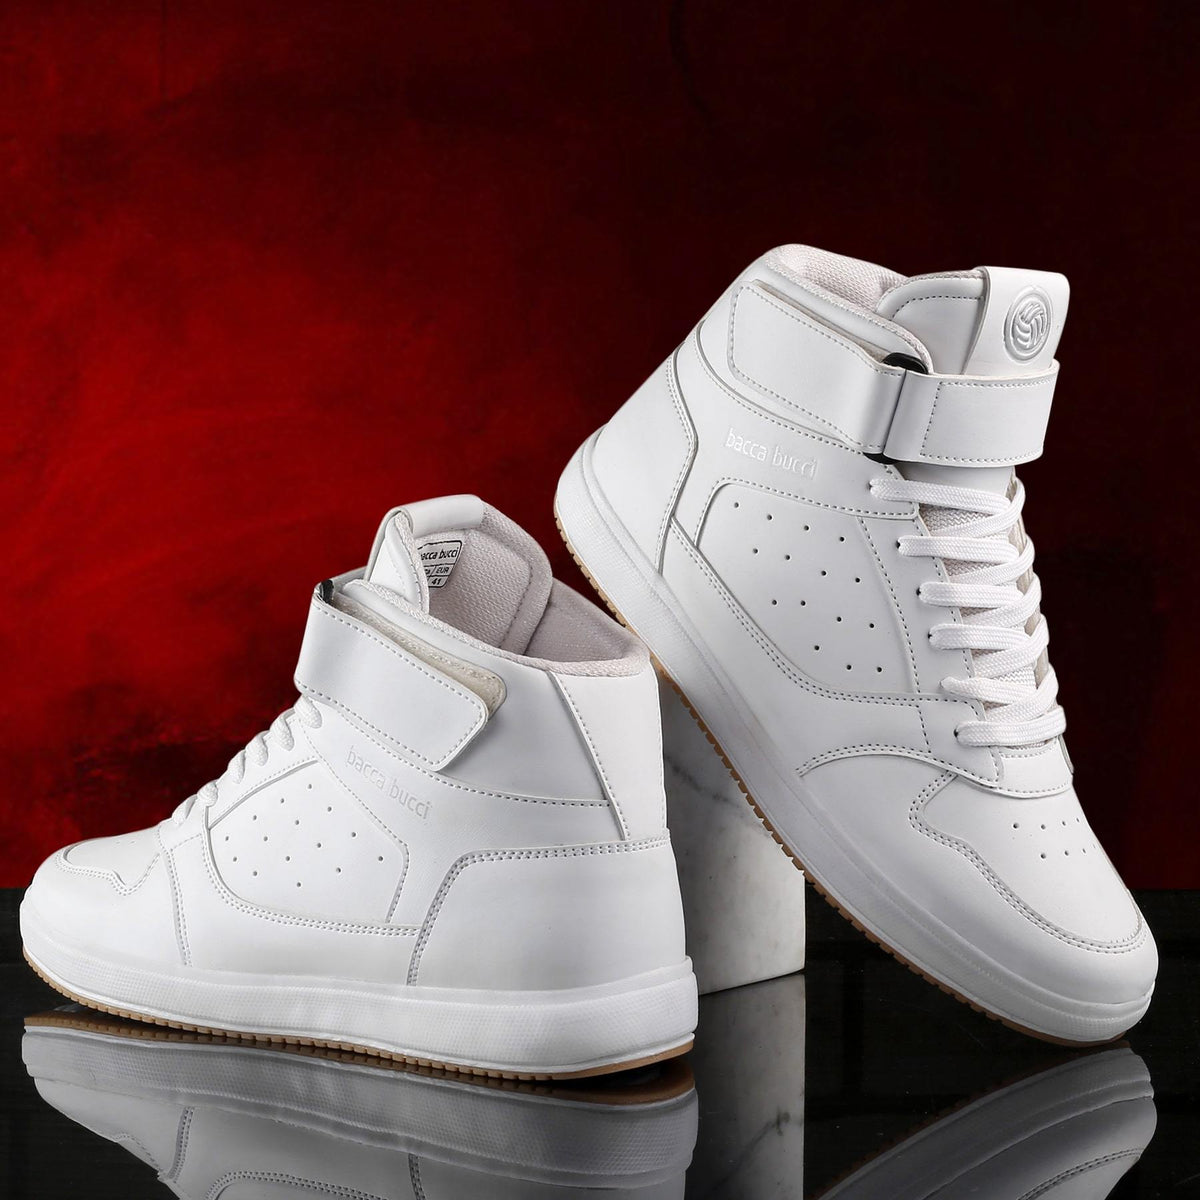 White Shoes for men | Afterburn white sneakers for men | Bacca Bucci